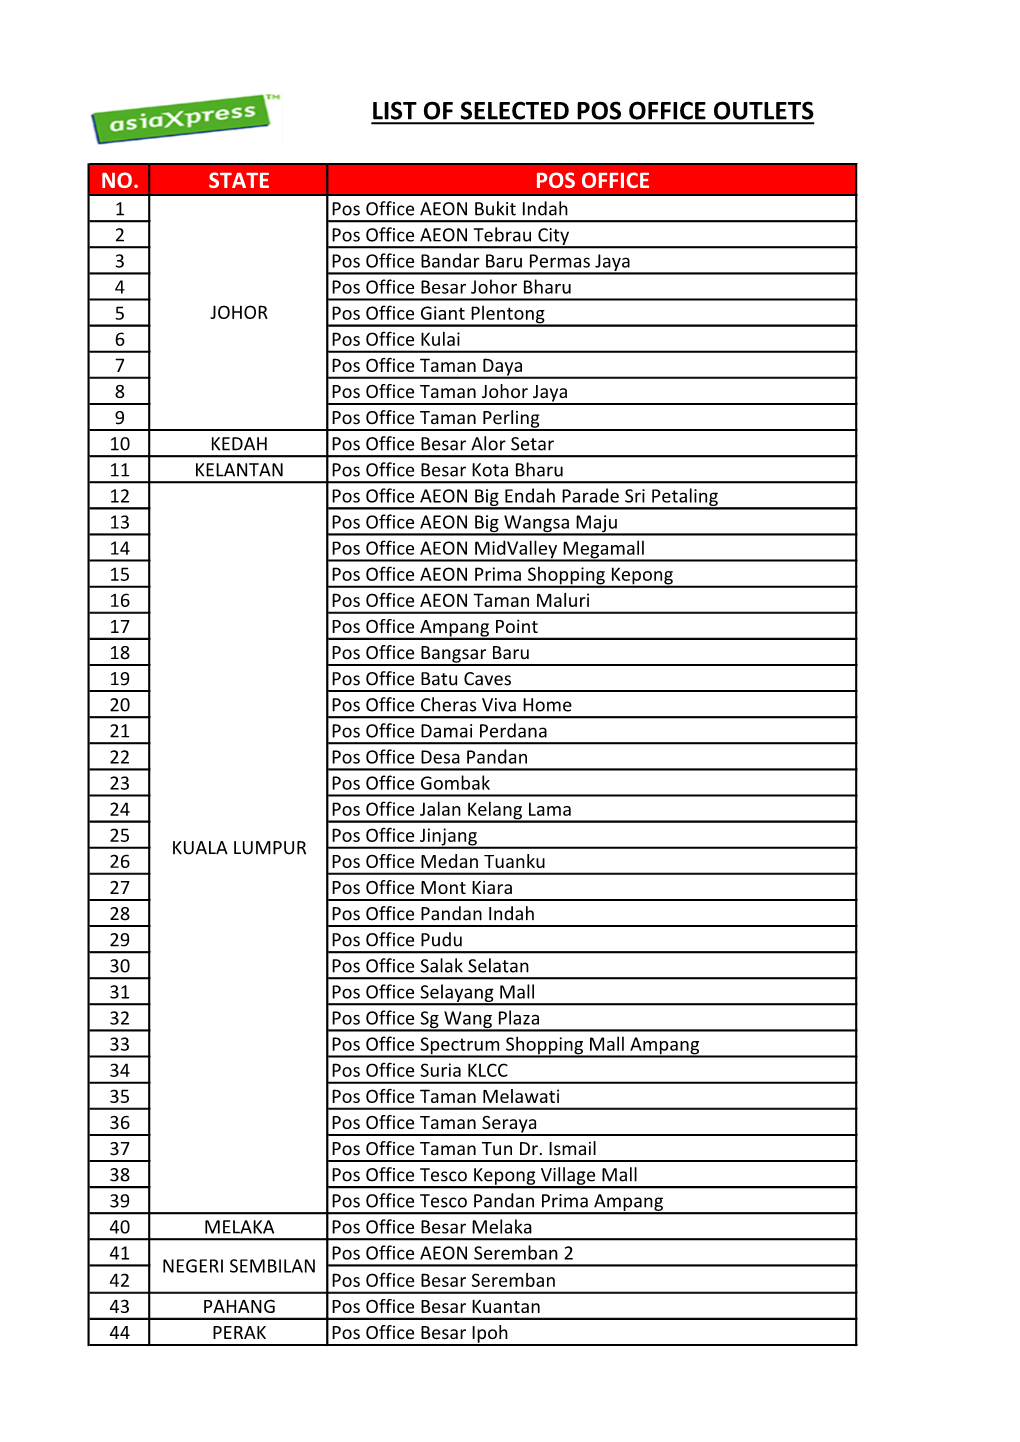 List of Selected Pos Office Outlets